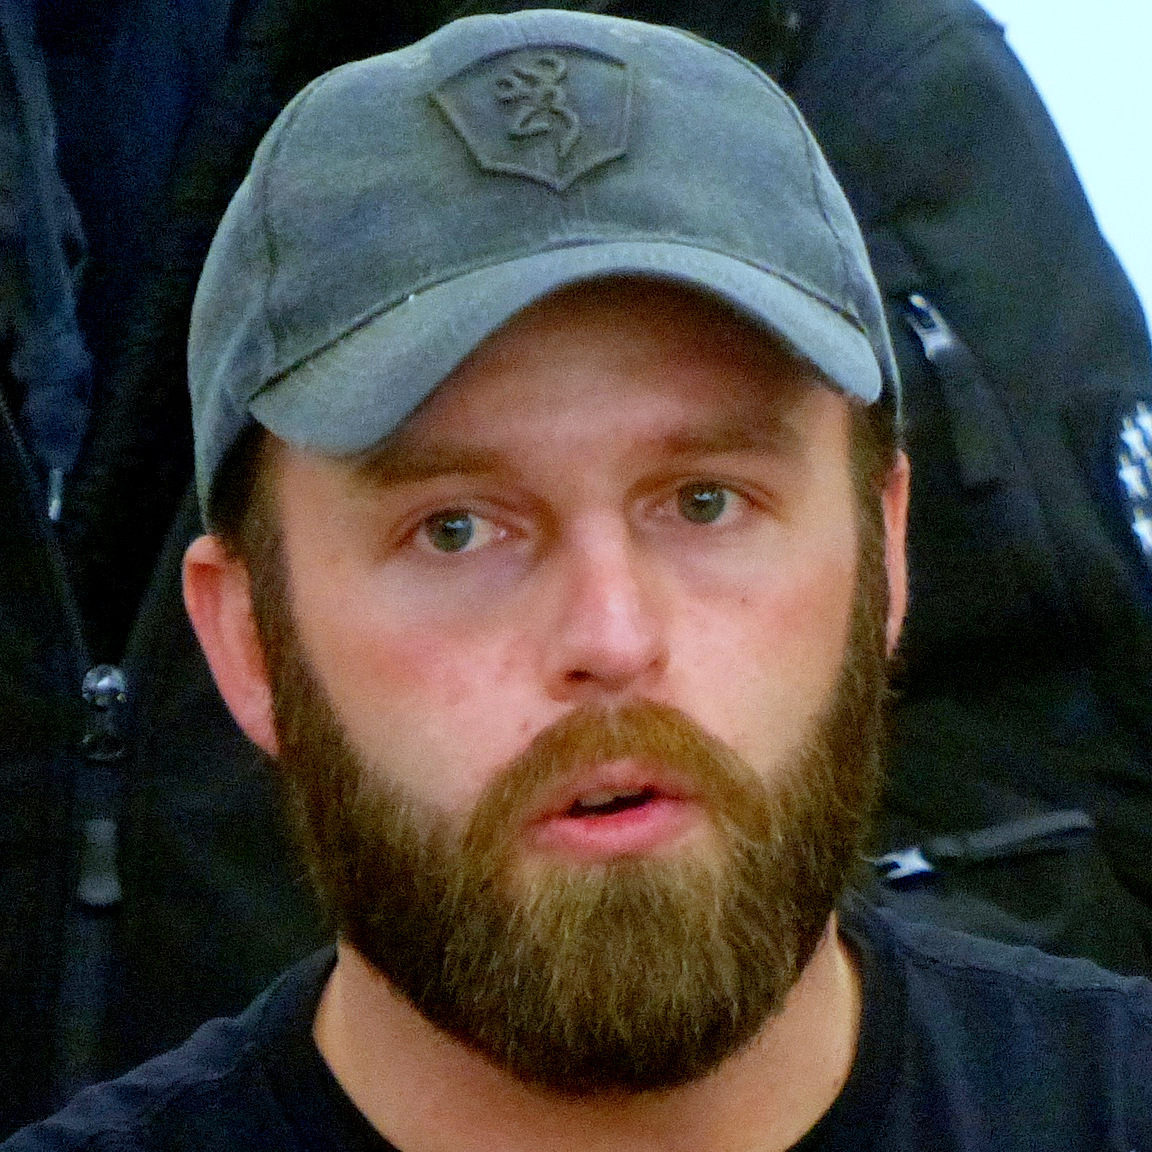 Ryan Payne former U.S. military intelligence officer, and both Bunker Hill, and Malheur standoff participant. (Photograph: Les Zaitz/AP)